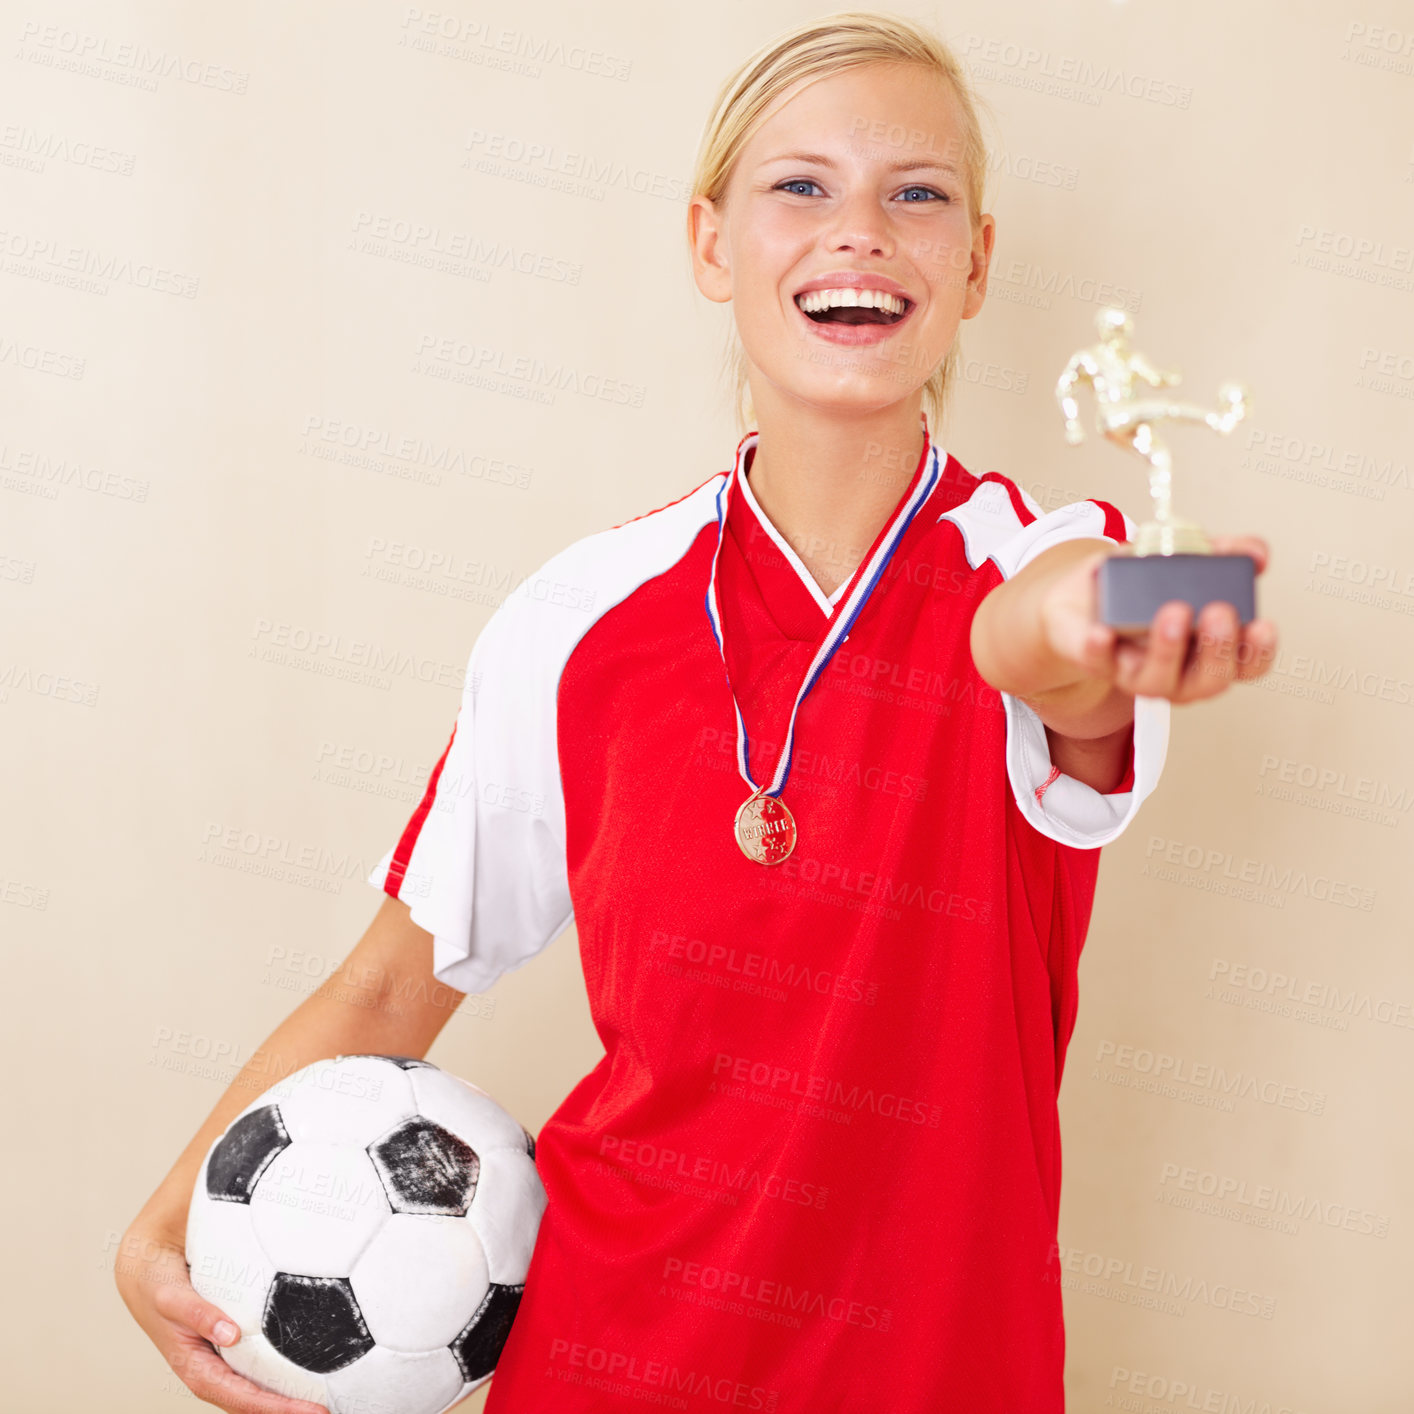 Buy stock photo Portrait of a young woman dressed in a soccer uniform holding up a trophy and a soccer ball